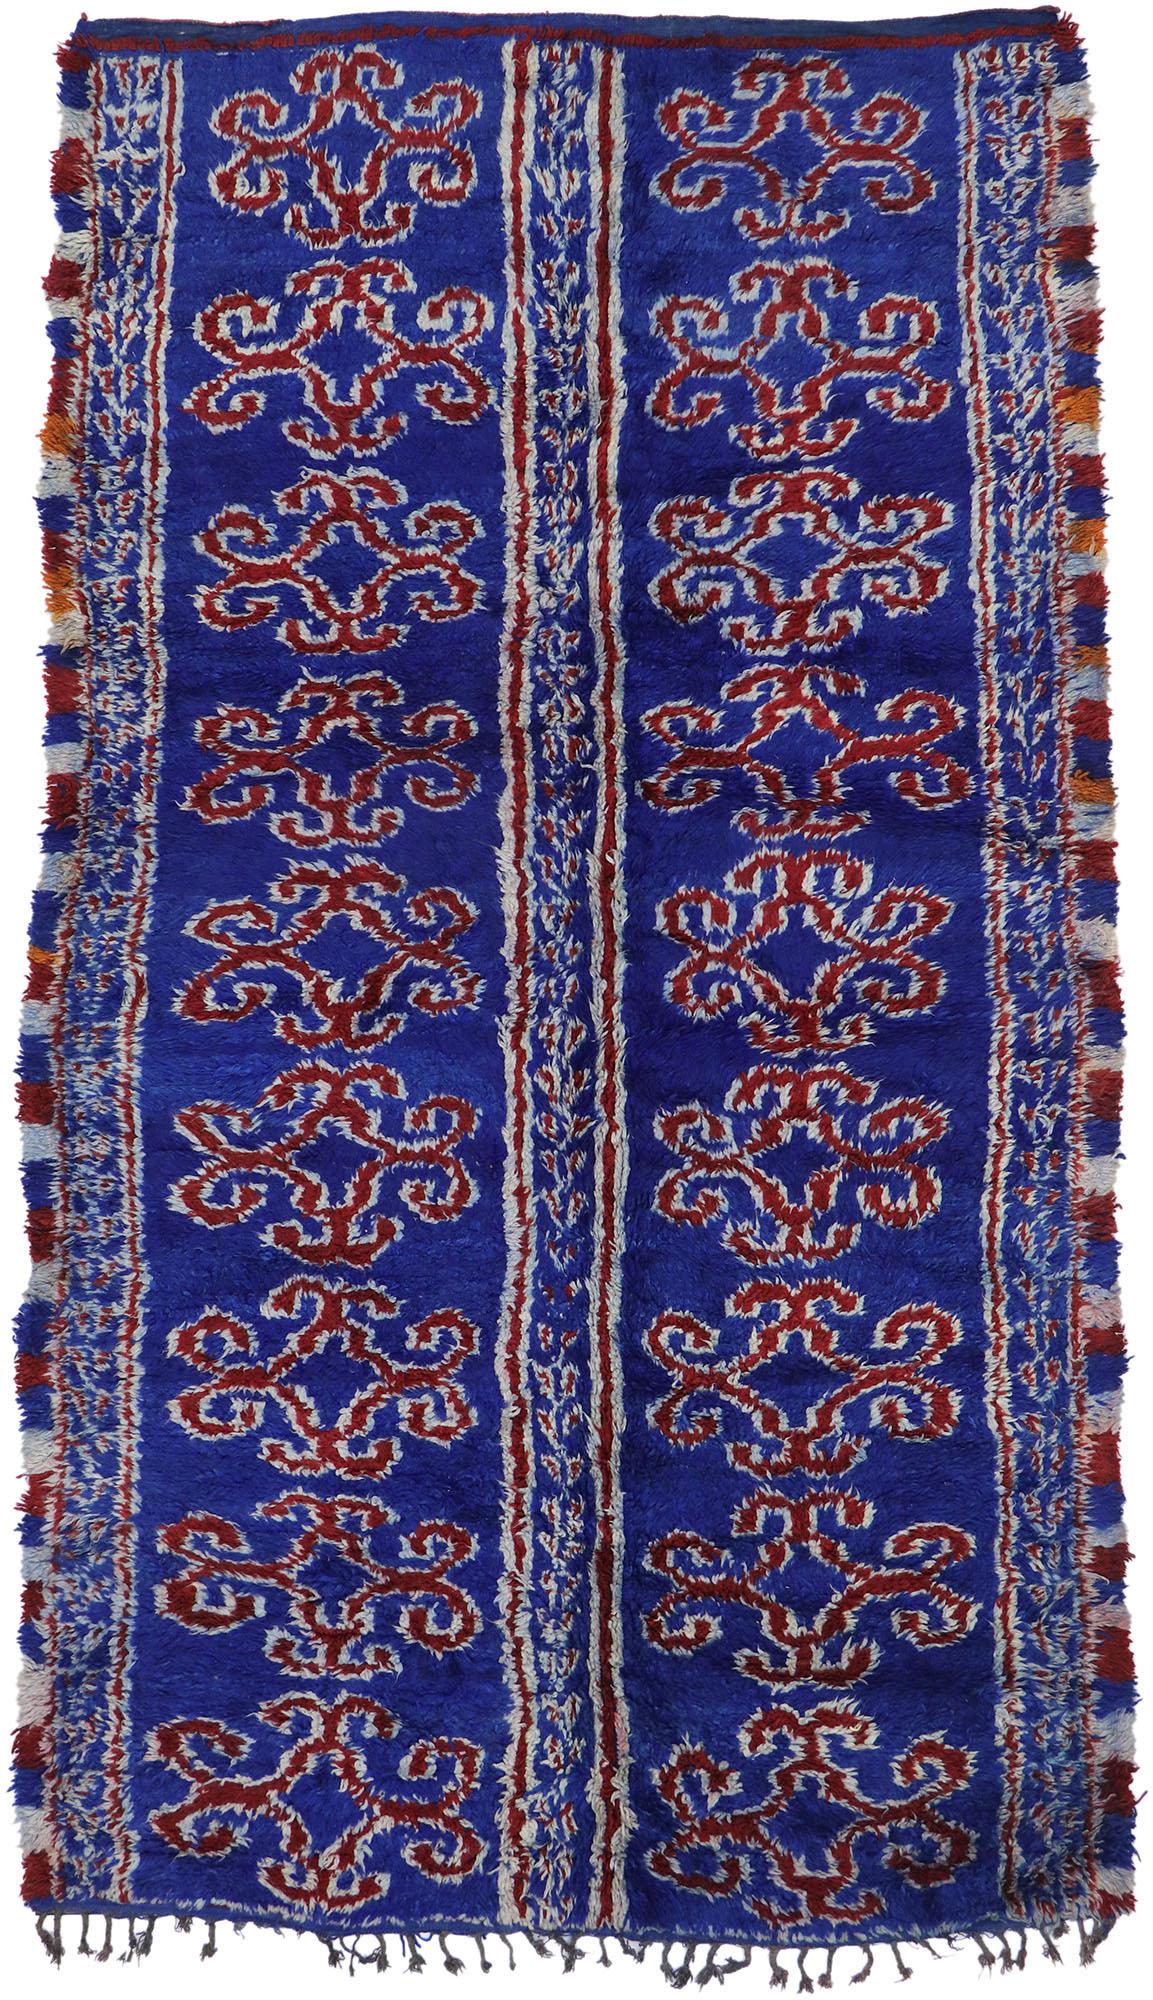 Vintage Berber Blue Beni M'Guild Moroccan Rug with Tribal Style For Sale 3